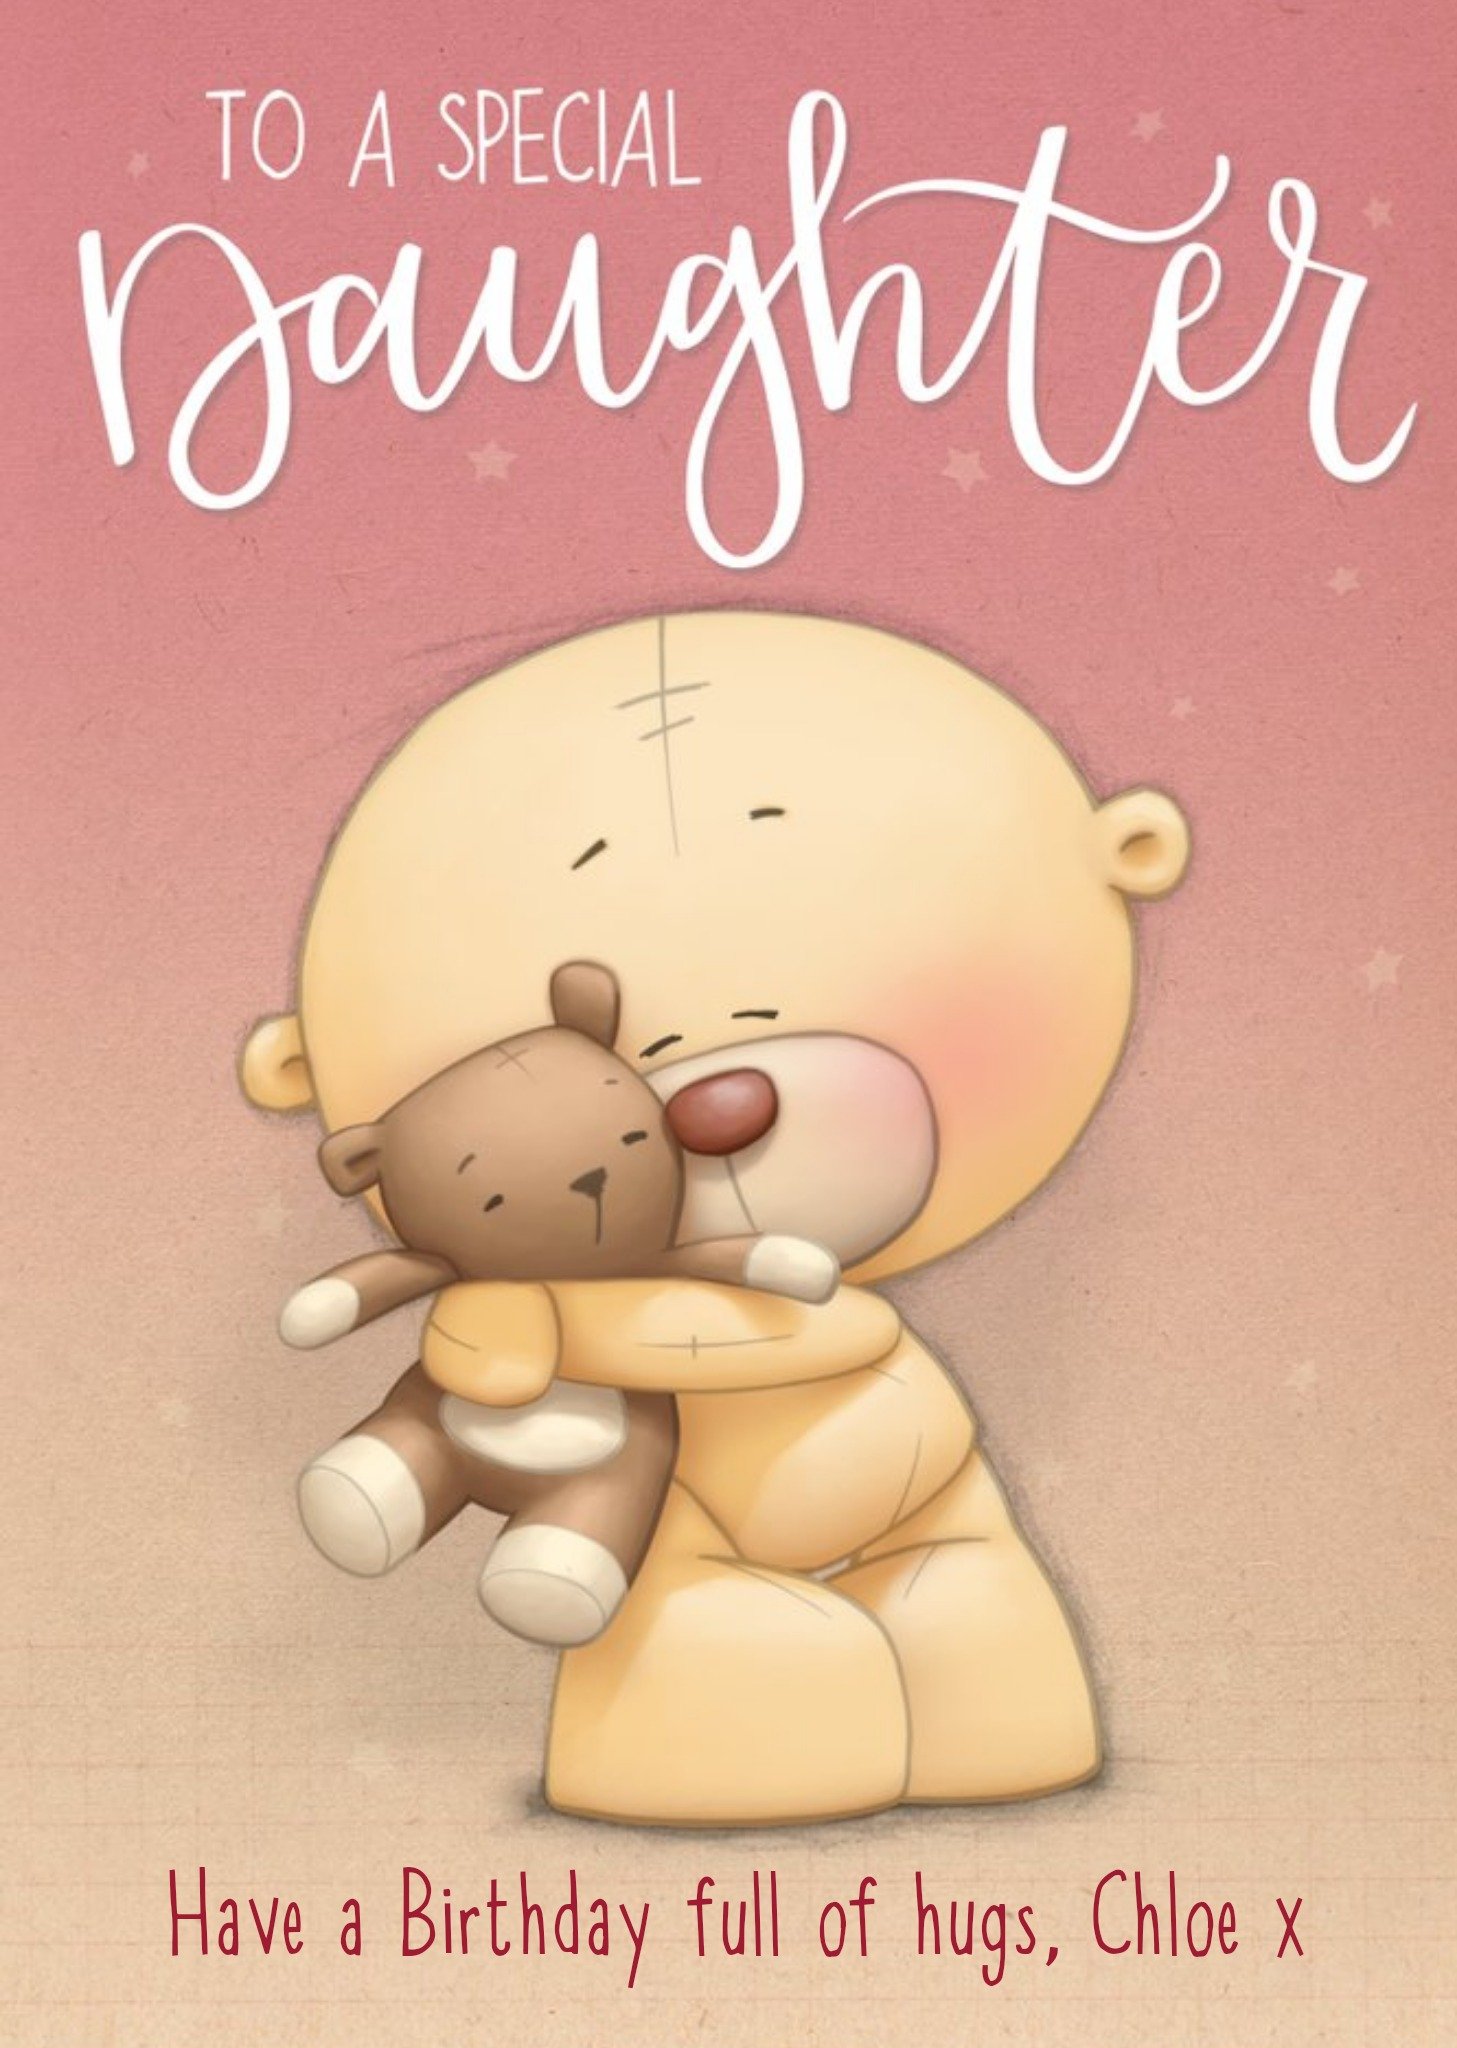 Moonpig Teddy Bear To A Special Daughter Birthday Card, Large